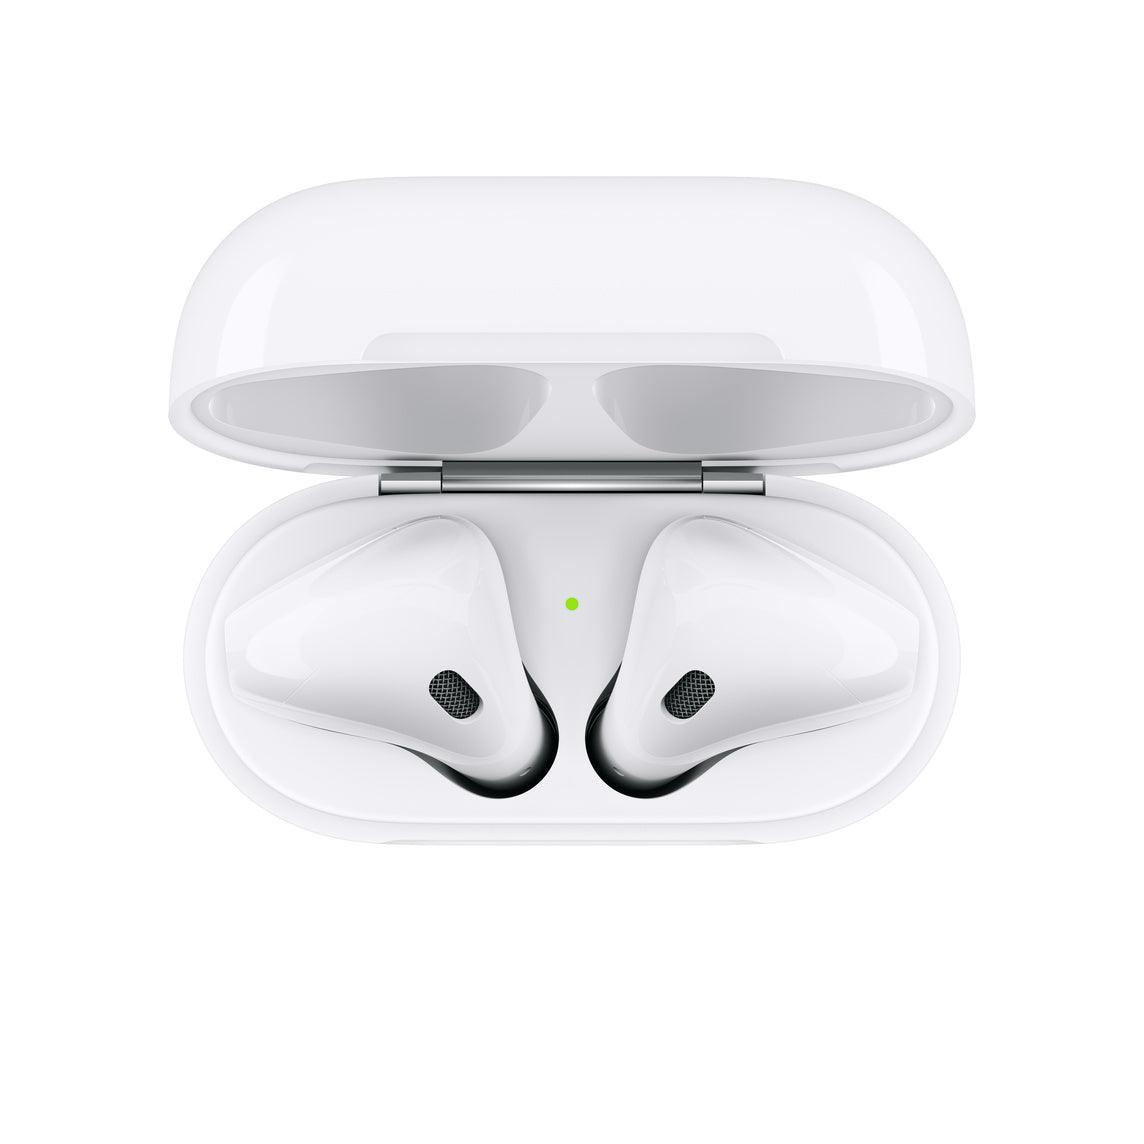 Apple AirPods 2 with Charging Case Bluetooth Headset - White - Apple AirPods 2 with Charging Case Bluetooth Headset - White - undefined Ennap.com